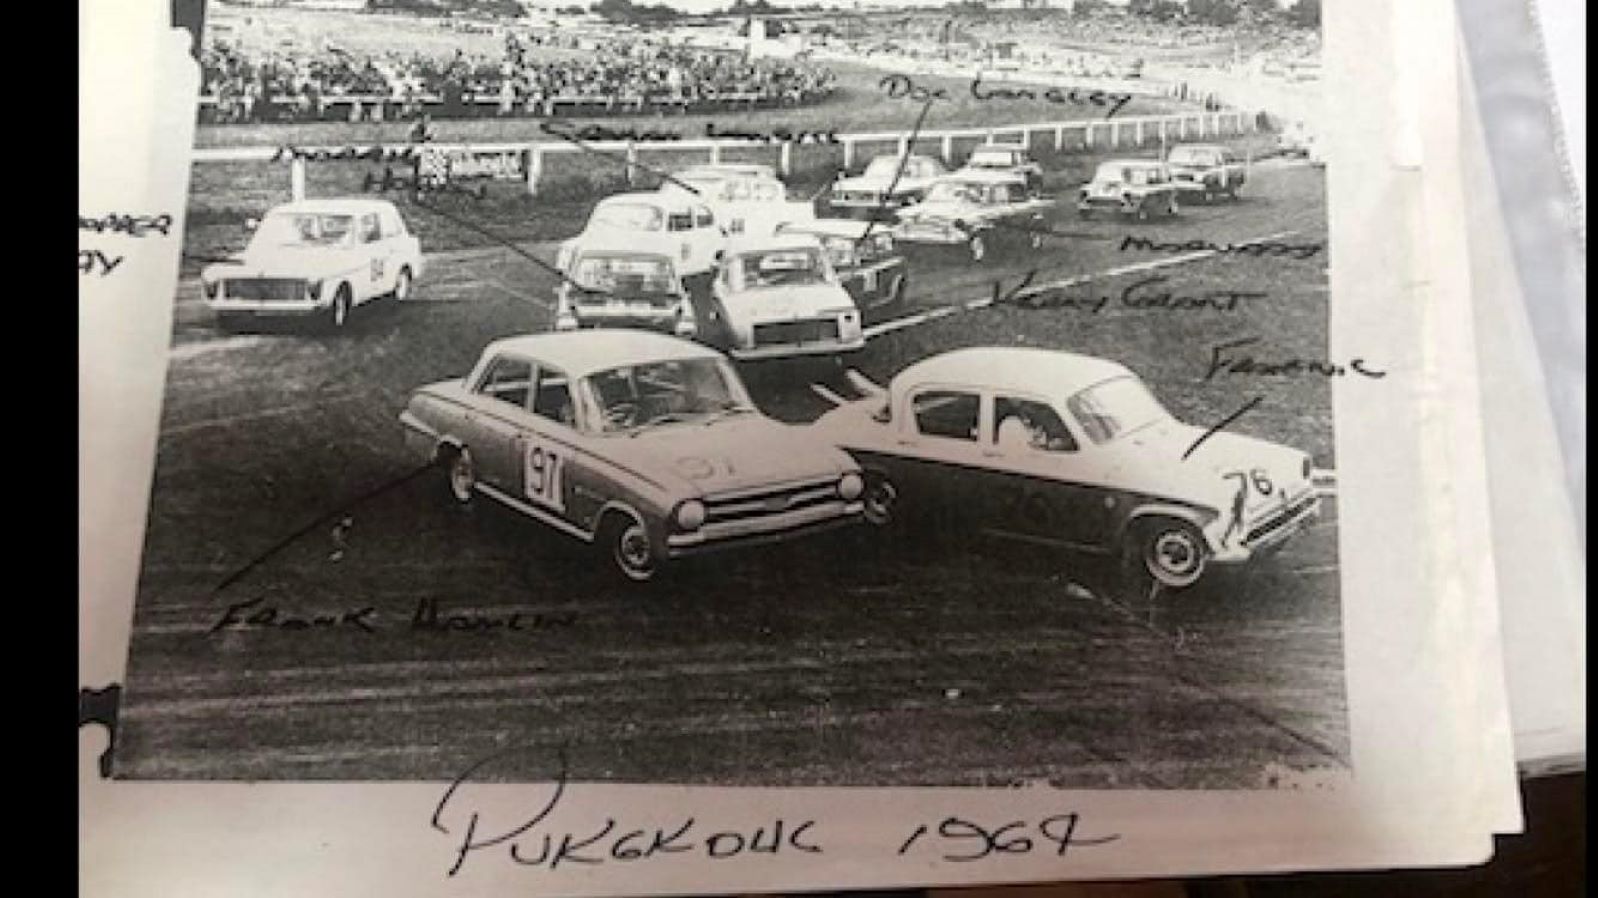 Name:  Pukekohe 1964 #022 1964 Saloon Car field at the Elbow - GP meeting Q 172 kb arch HVRA Bruce Dyer.jpg
Views: 349
Size:  172.4 KB